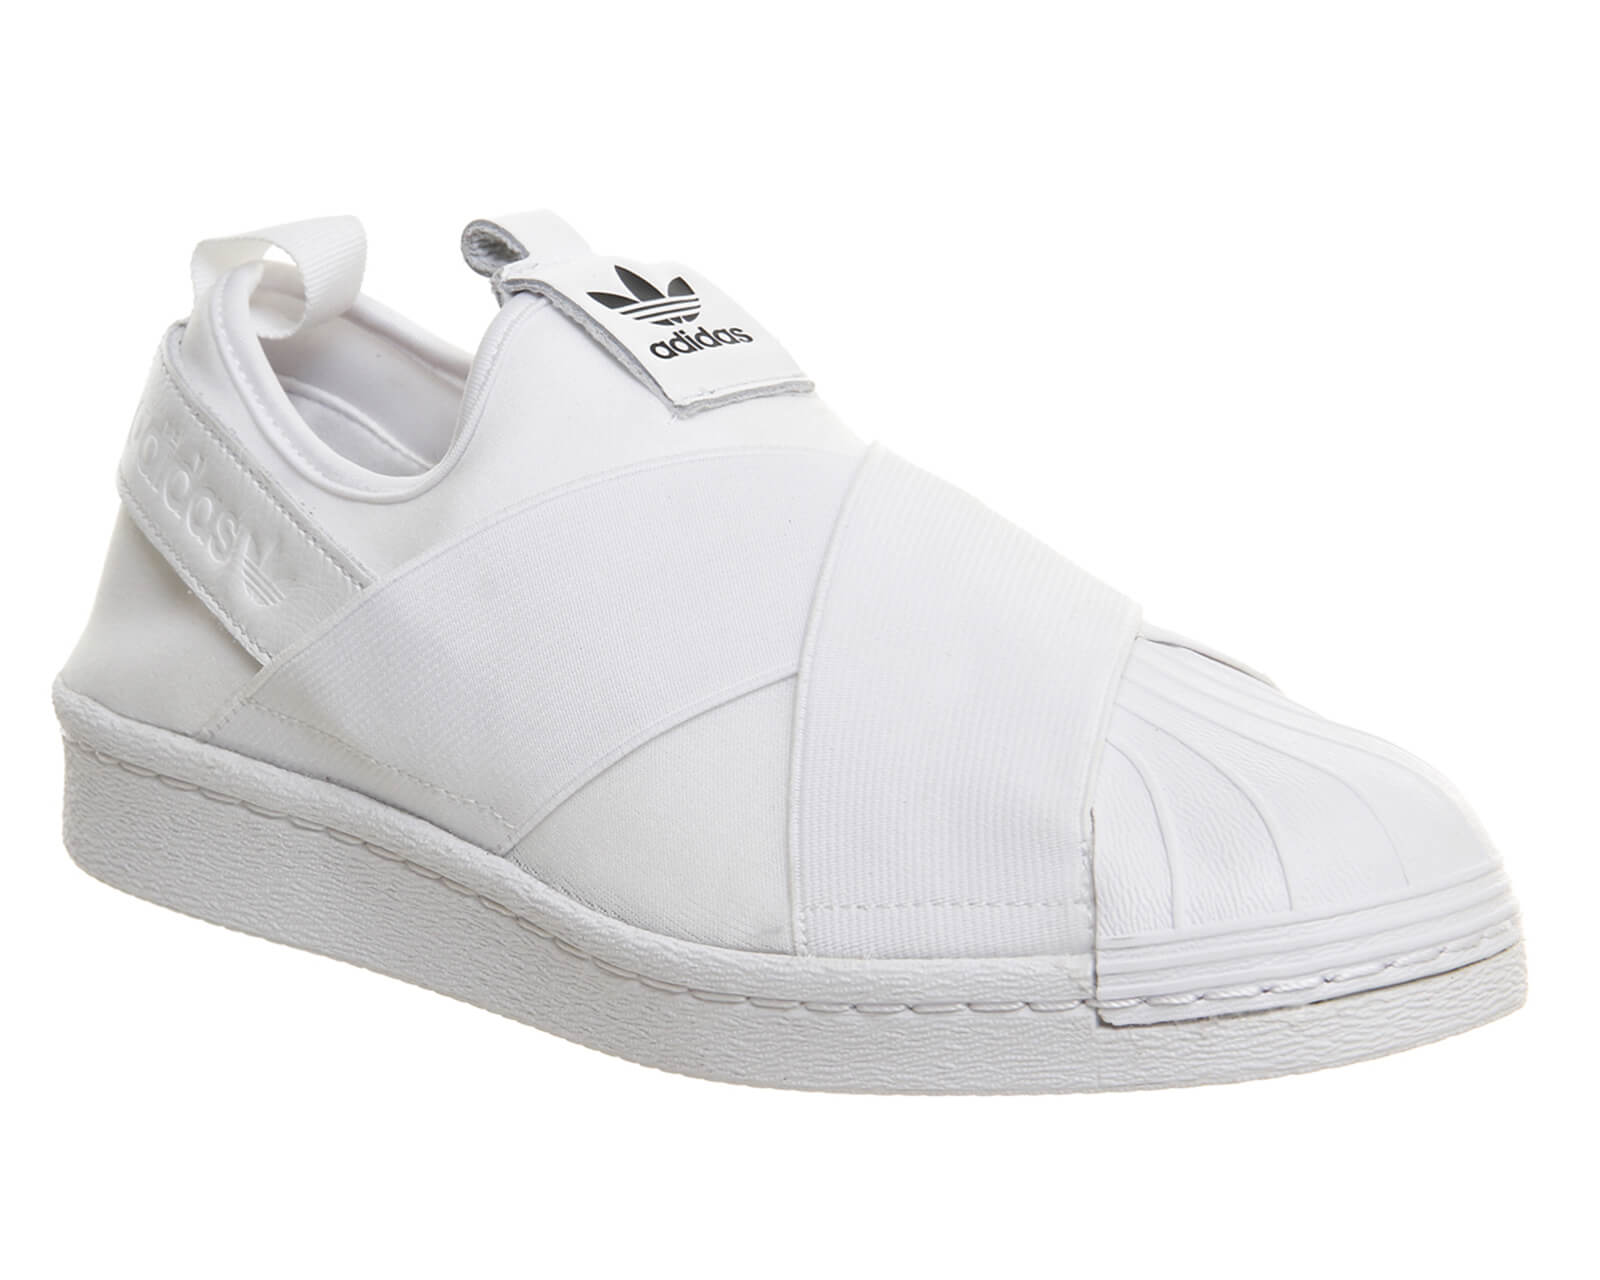 adidas Superstar Slip On White Mono | Where To Buy | TBC | The Sole Supplier